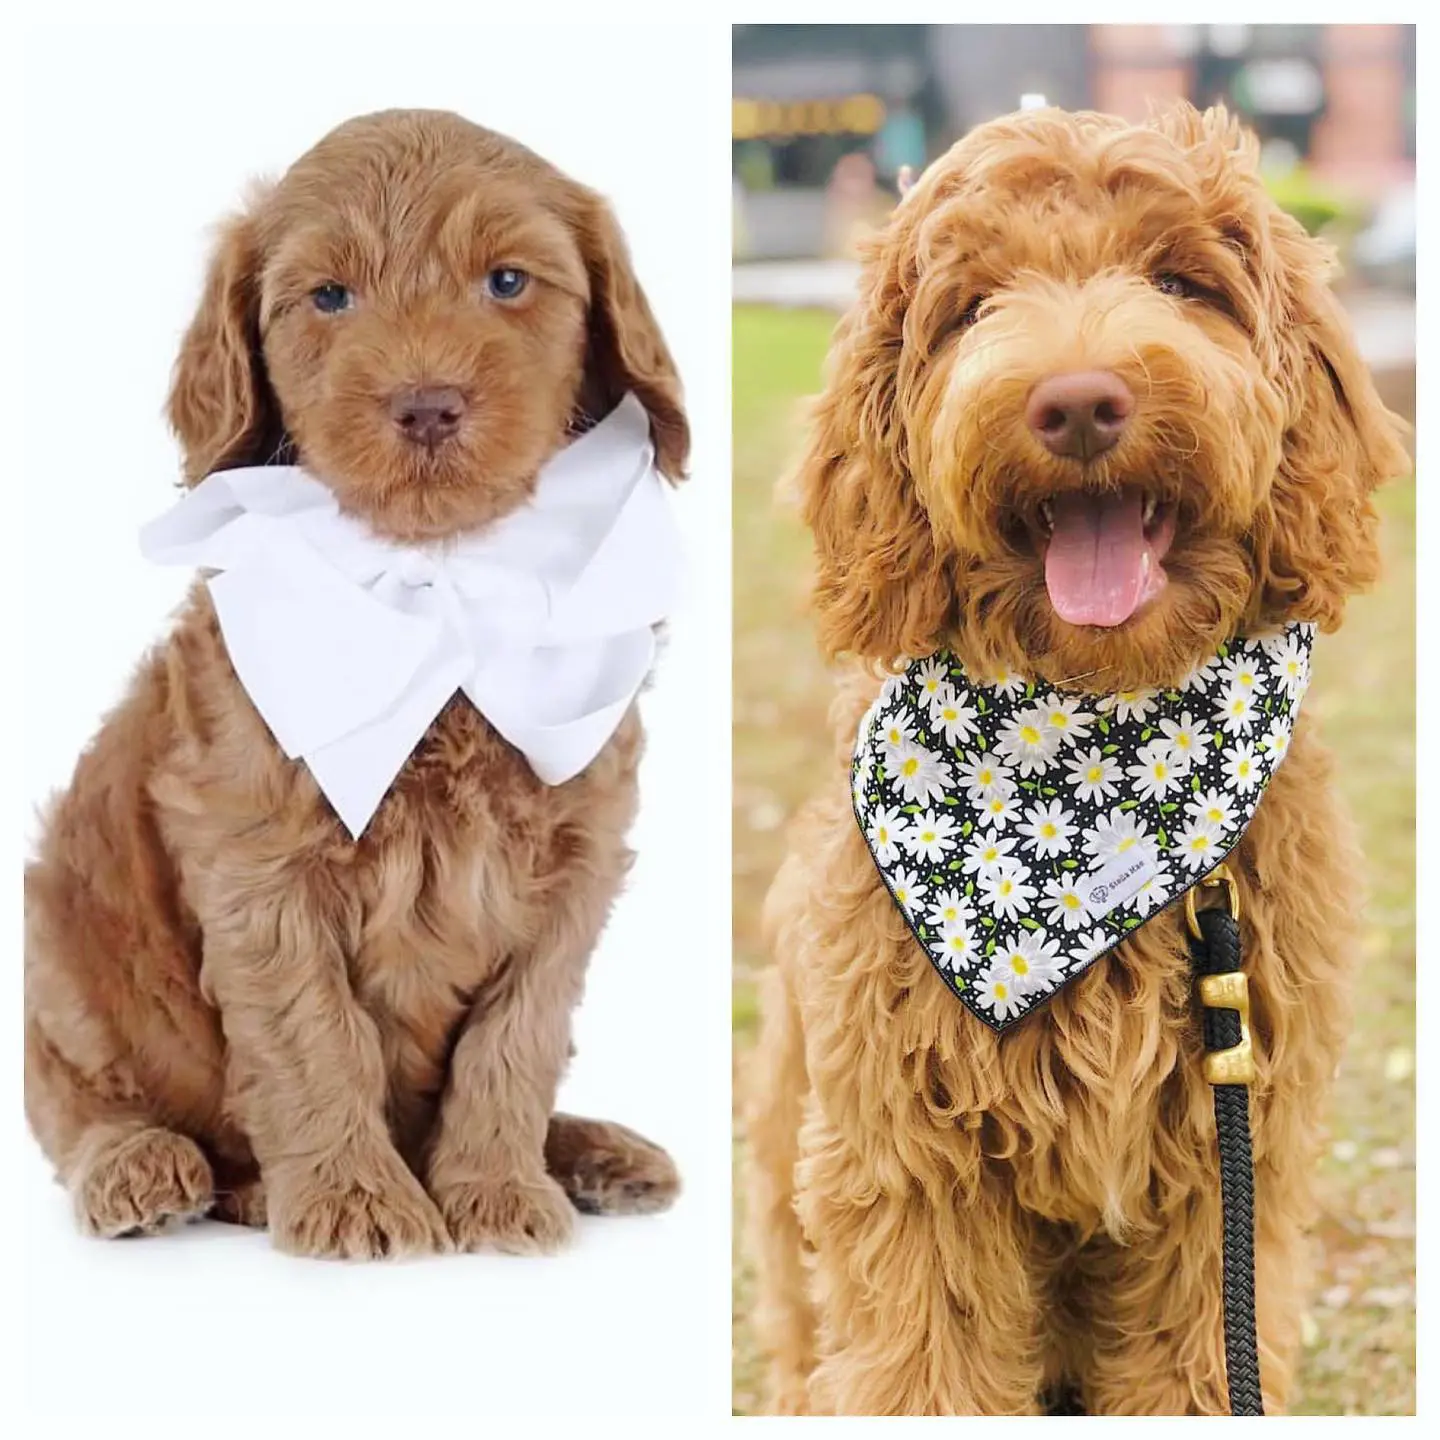 F1 F1BB English Teddybear Goldendoodle Teddy Bear Red Apricot mini side by side puppy and adult